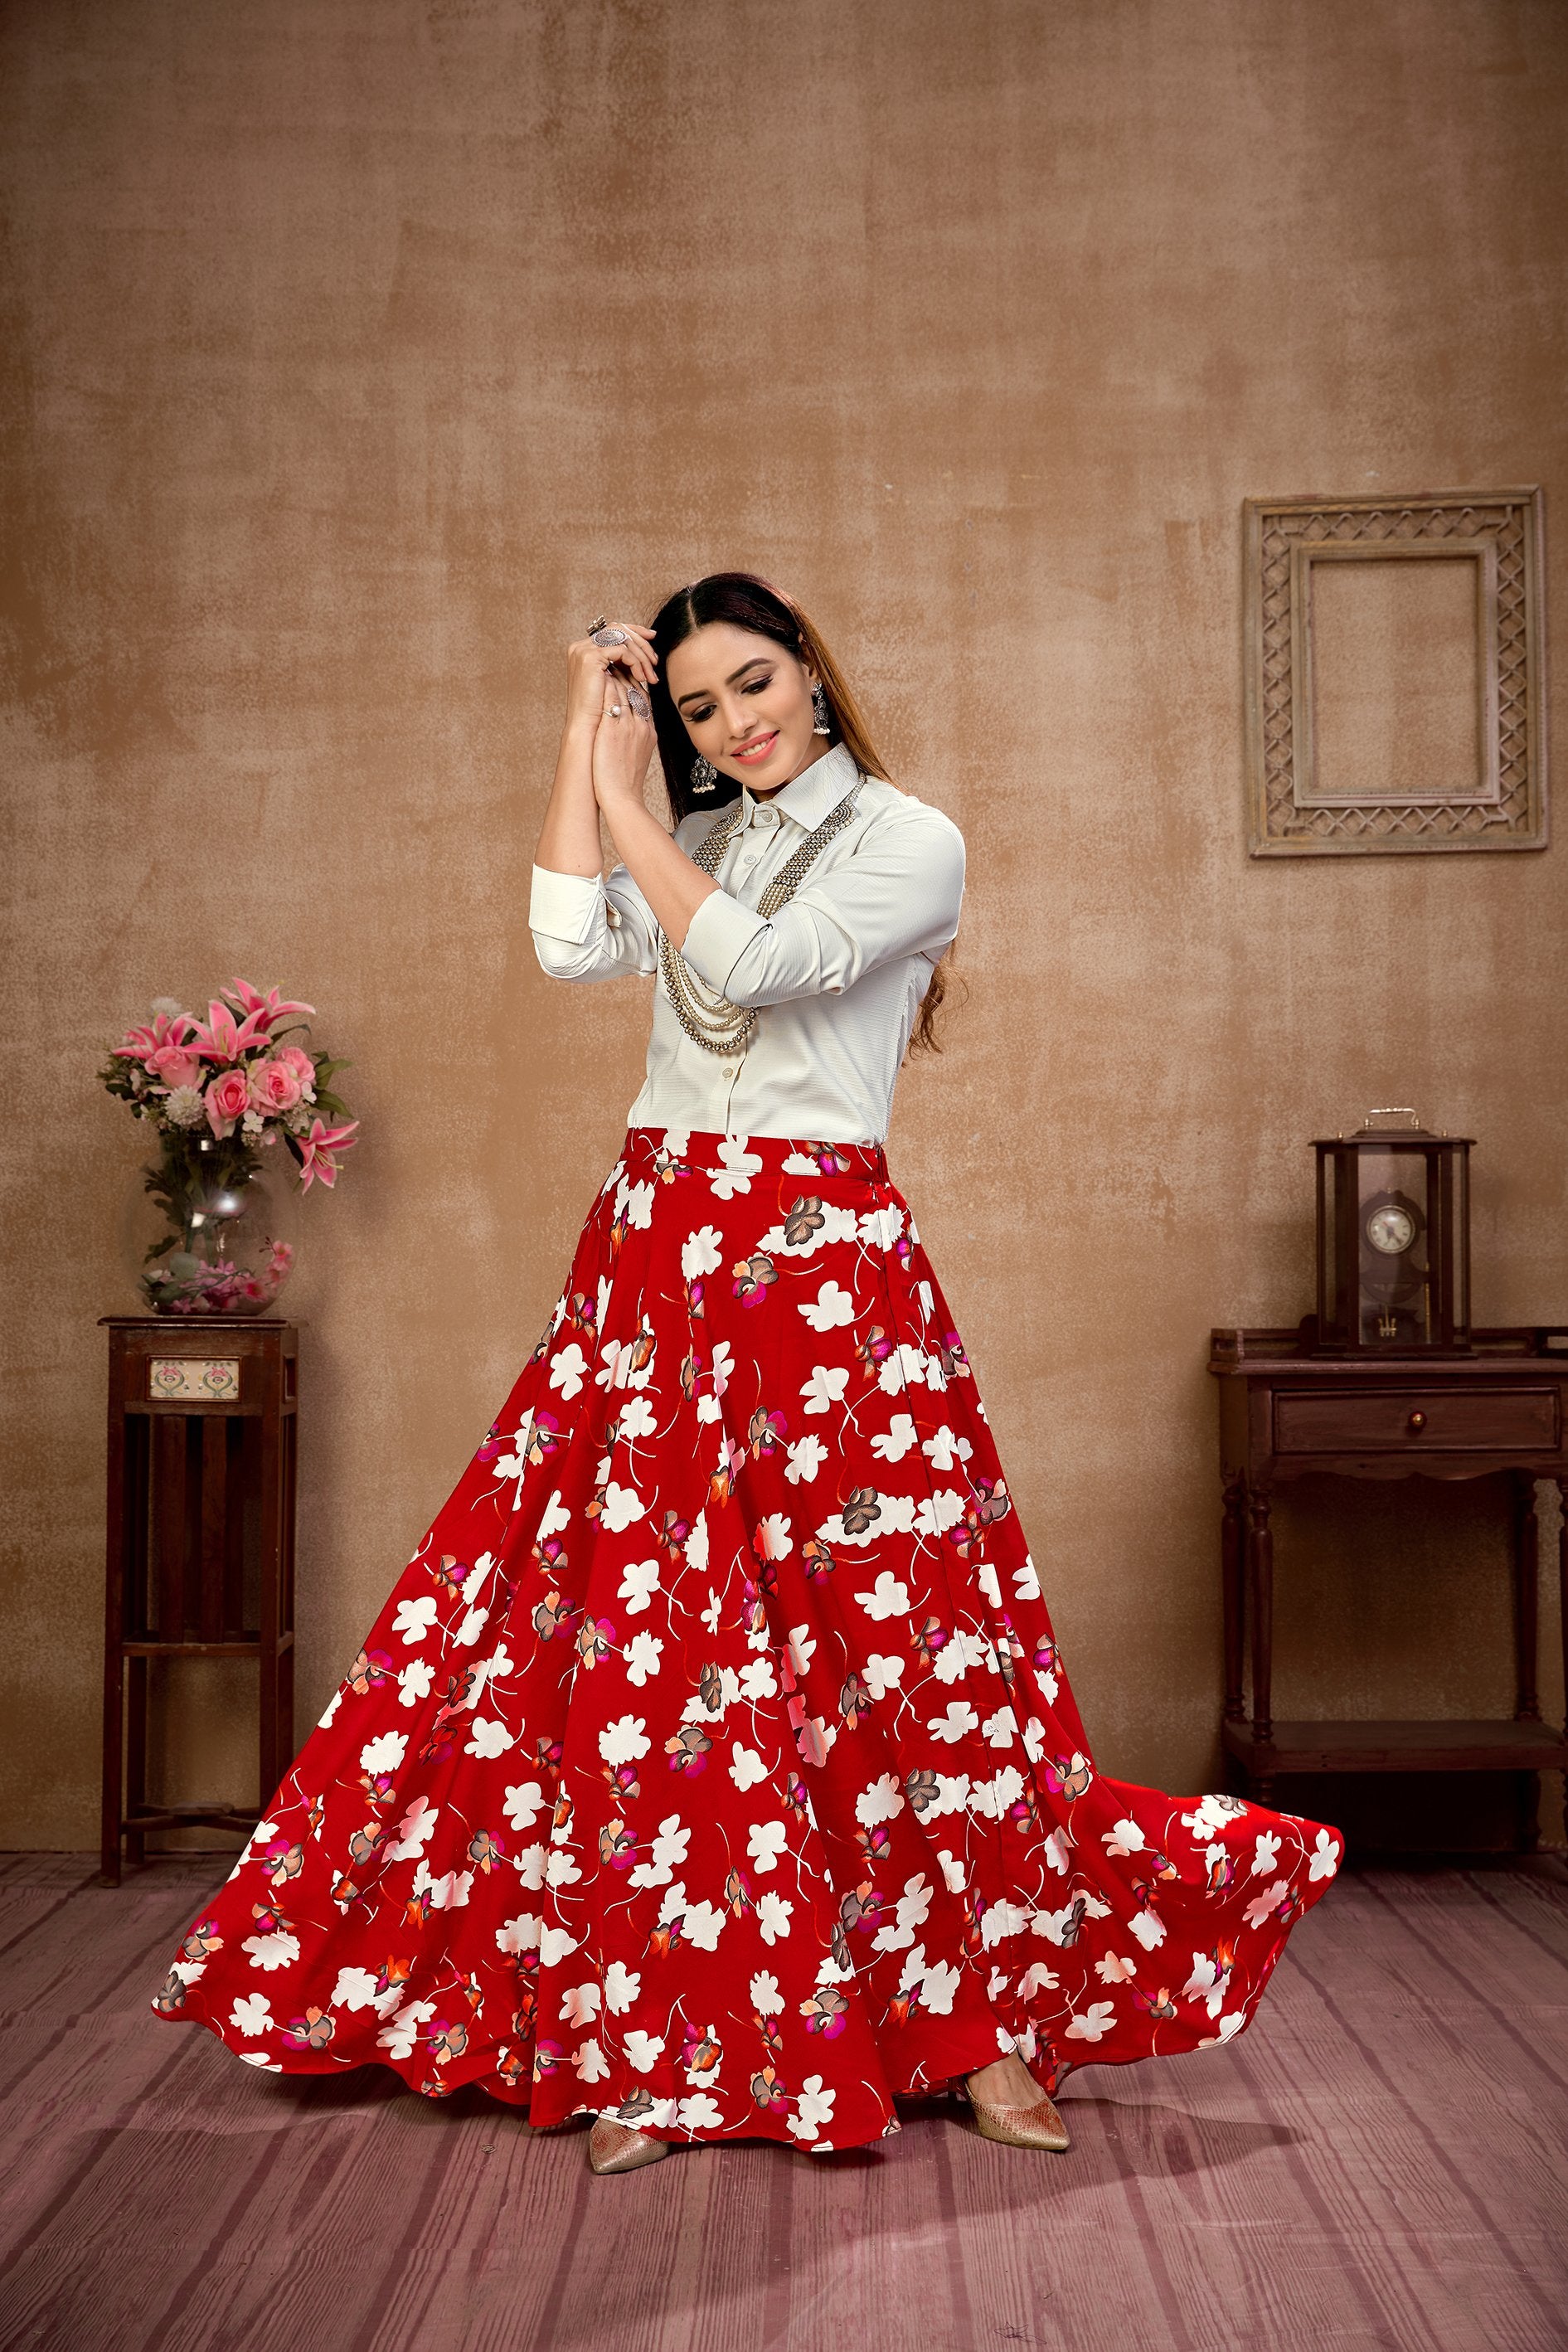 Dazzling White Top With Red Floral Printed Skirt For Party Wear